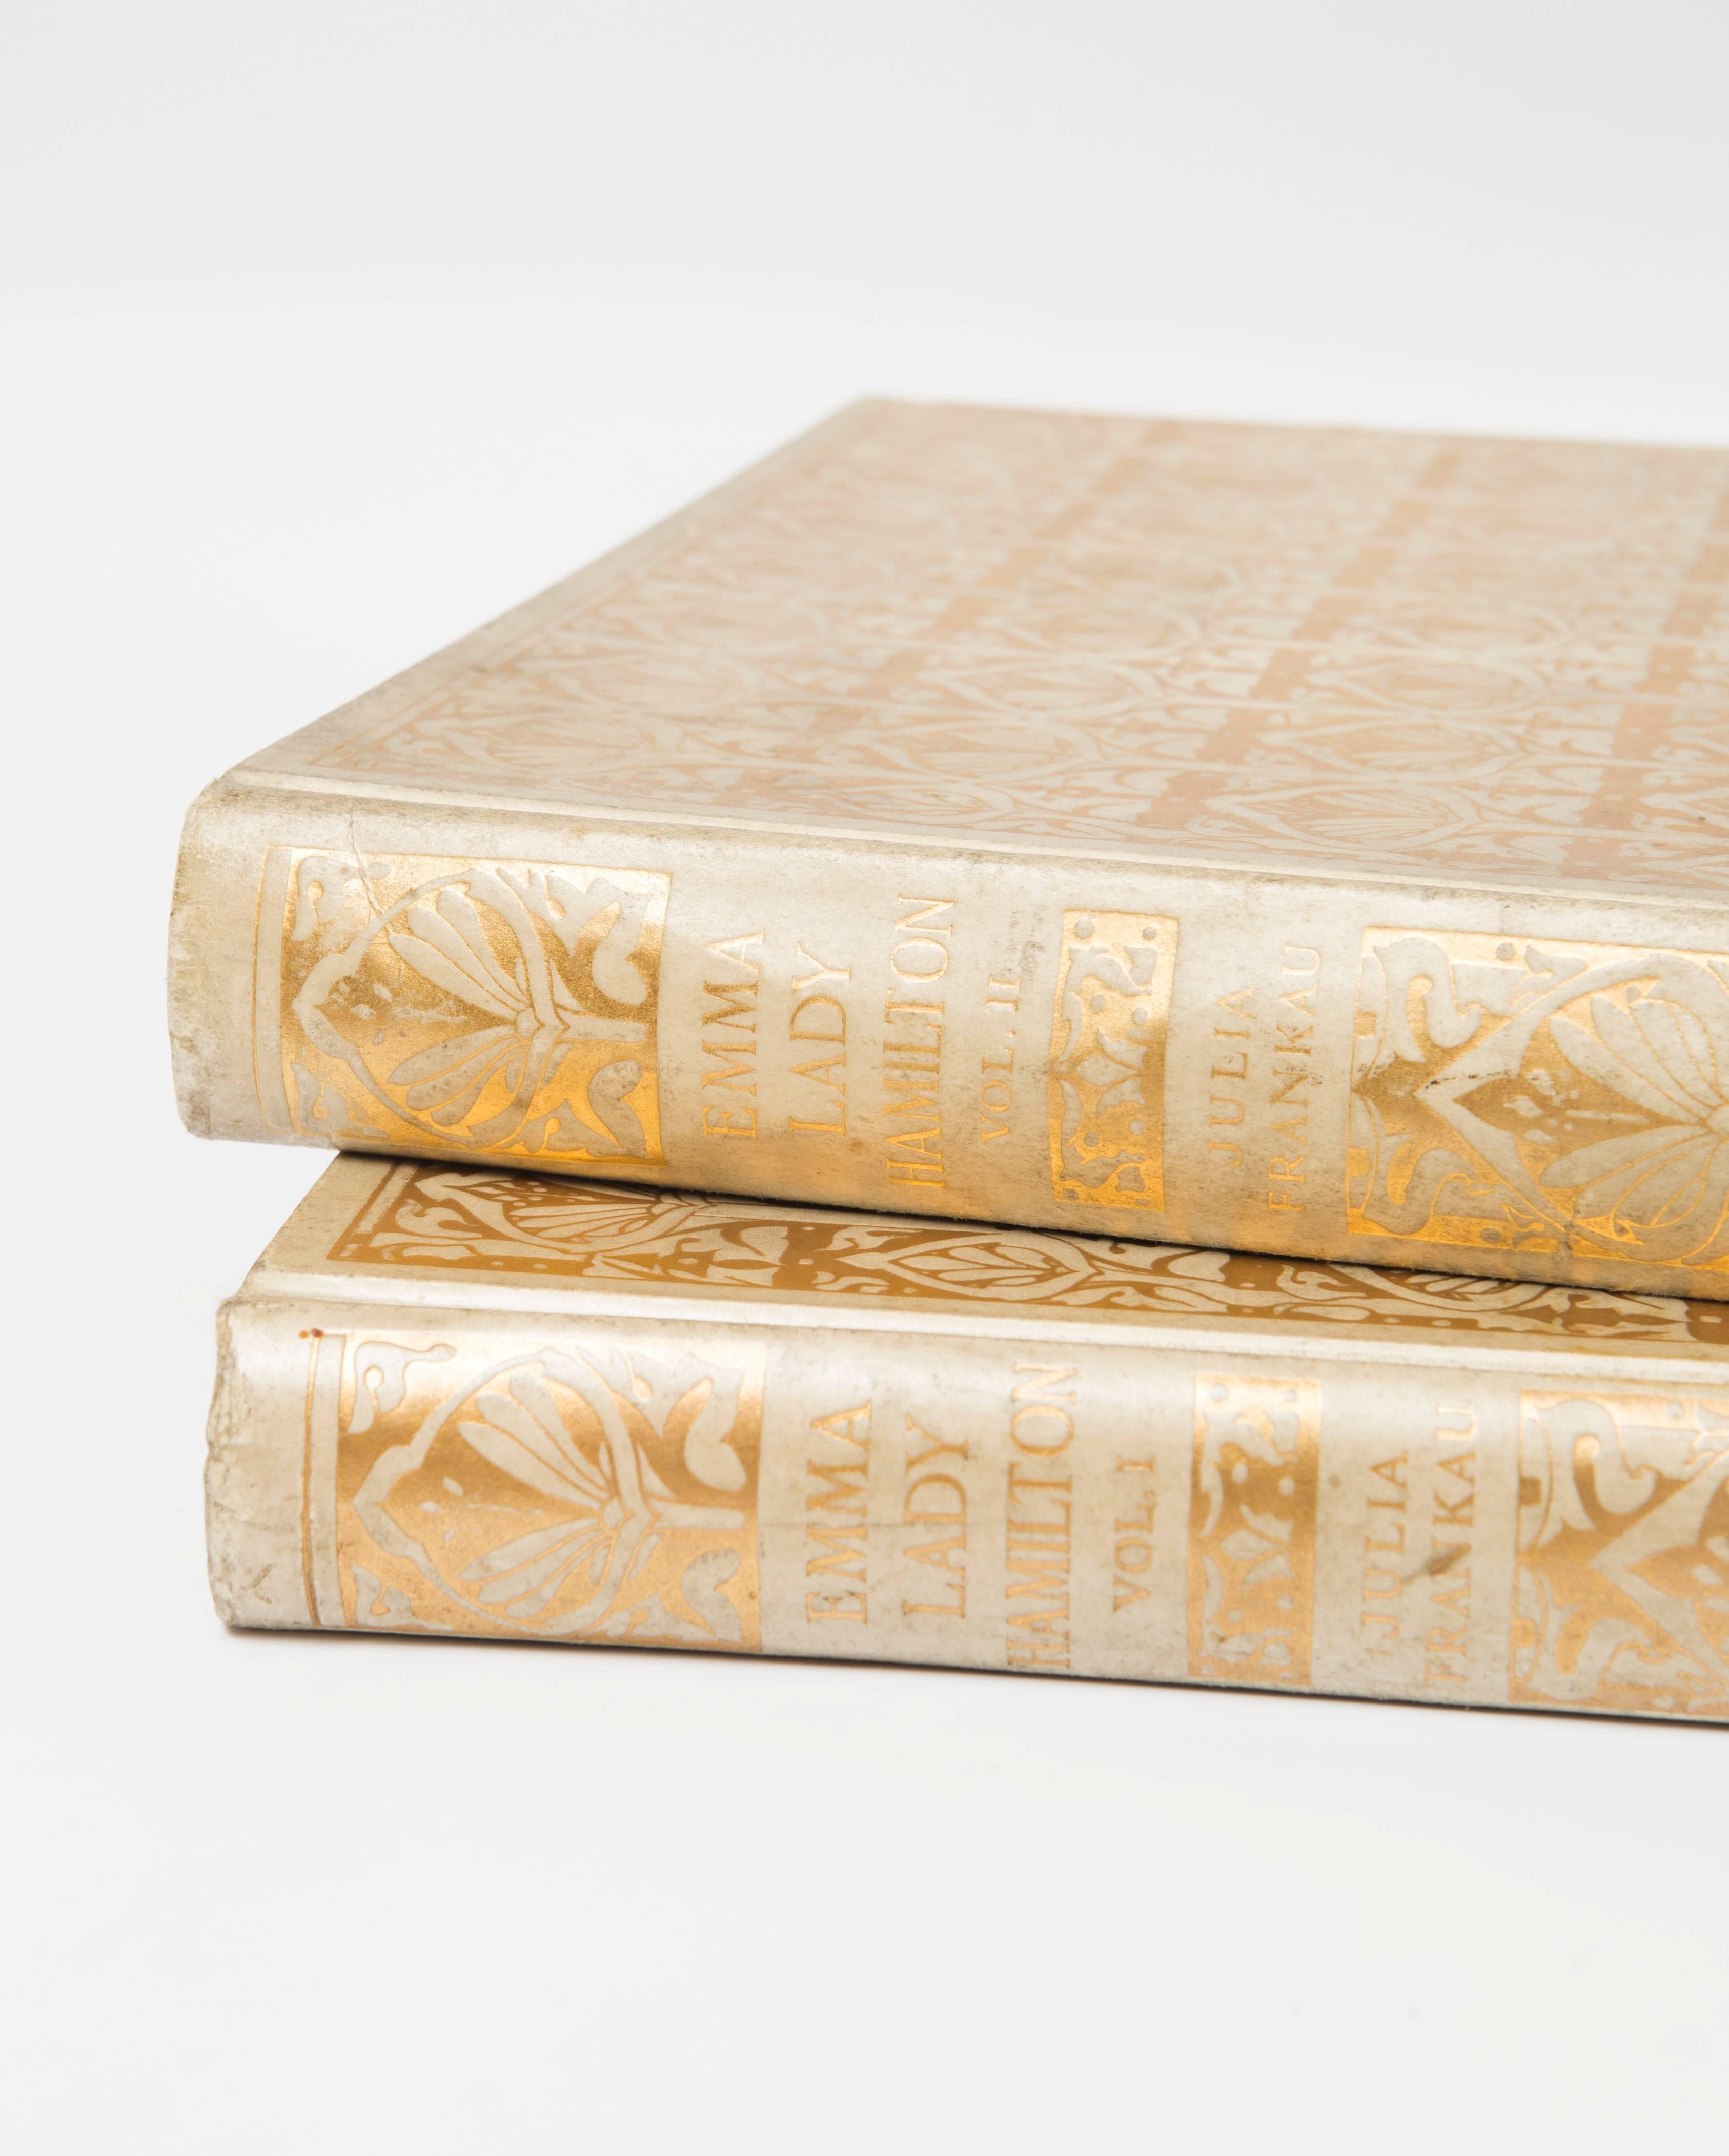 This set of two vellum volumes of the story of Emma, Lady Hamilton by Julia Frankau is from Macmillan and Co., Limited on Saint Martin's Street, London, 1911. The set is in vellum with gold embossing. The set is large and very impressive. 
